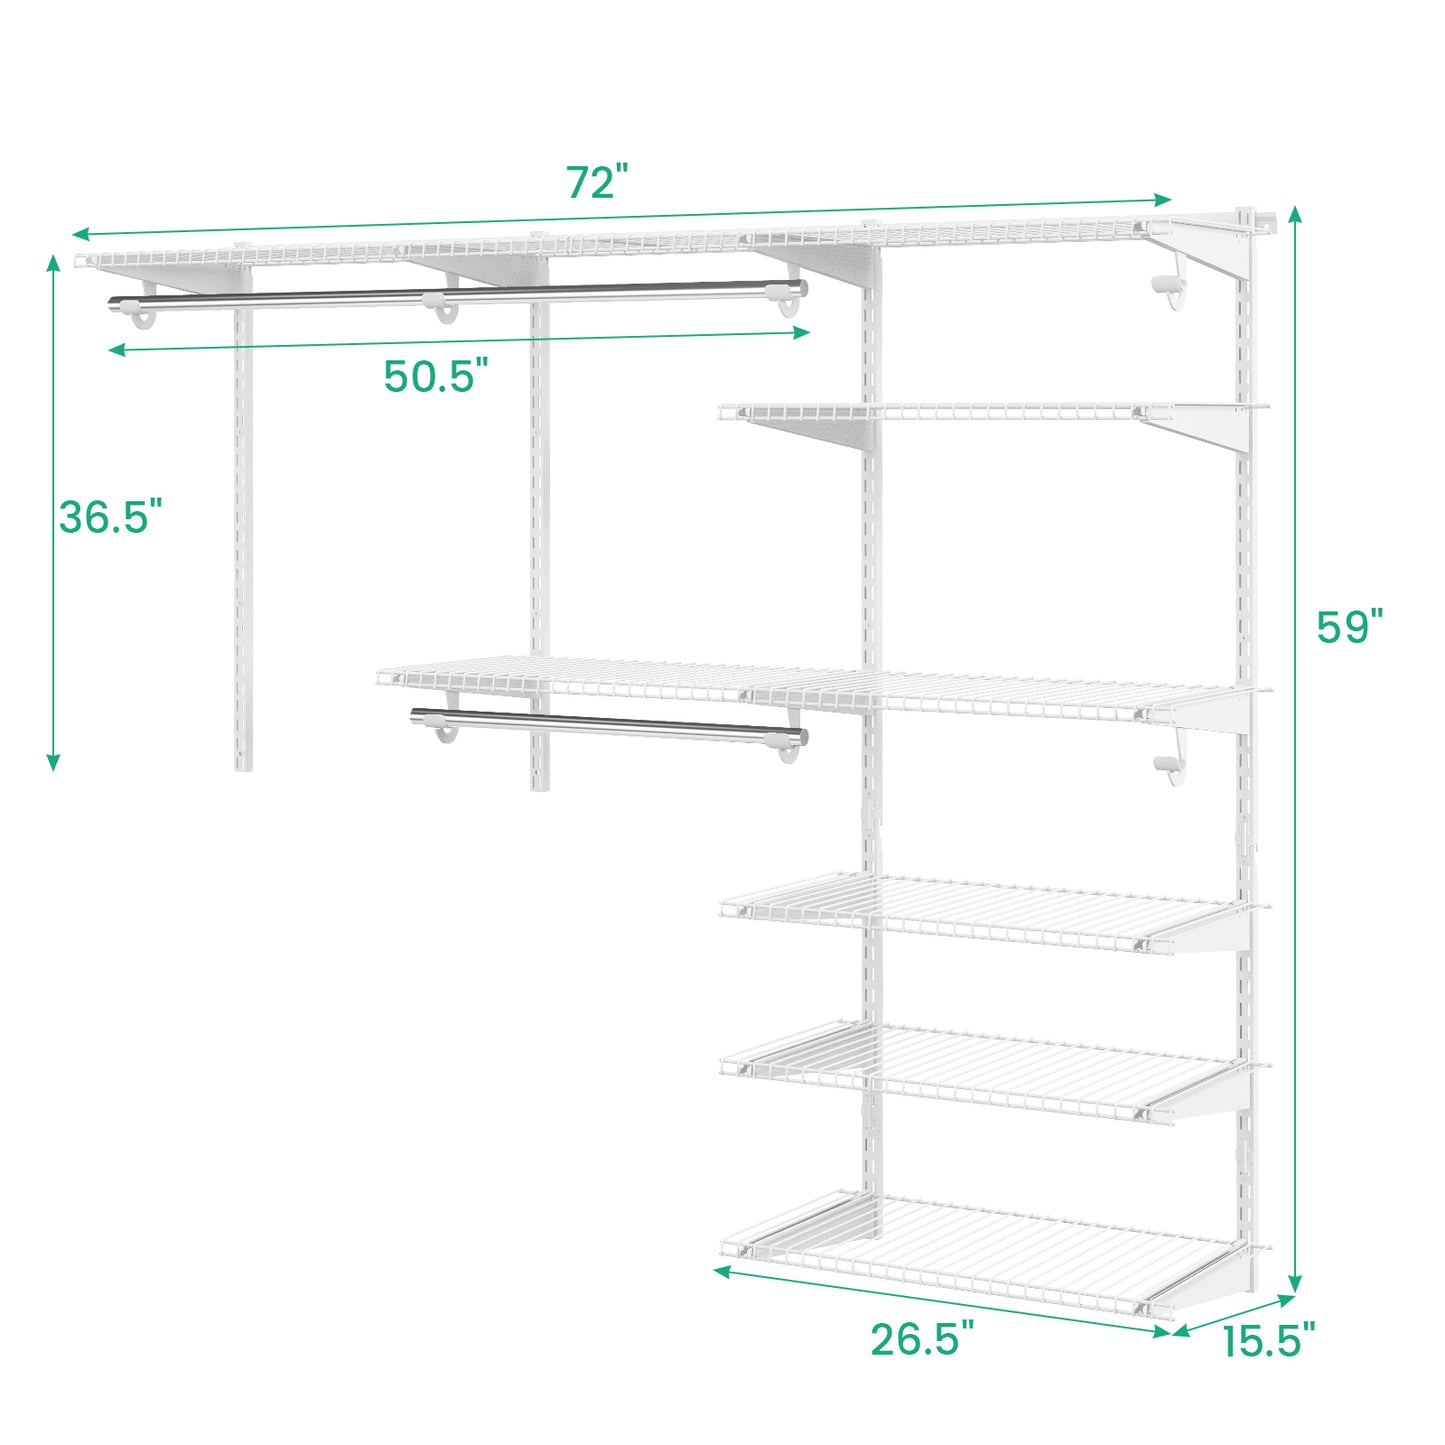 Adjustable Closet Organizer Kit with Shelves and Hanging Rods for 4 to 6 Feet-White